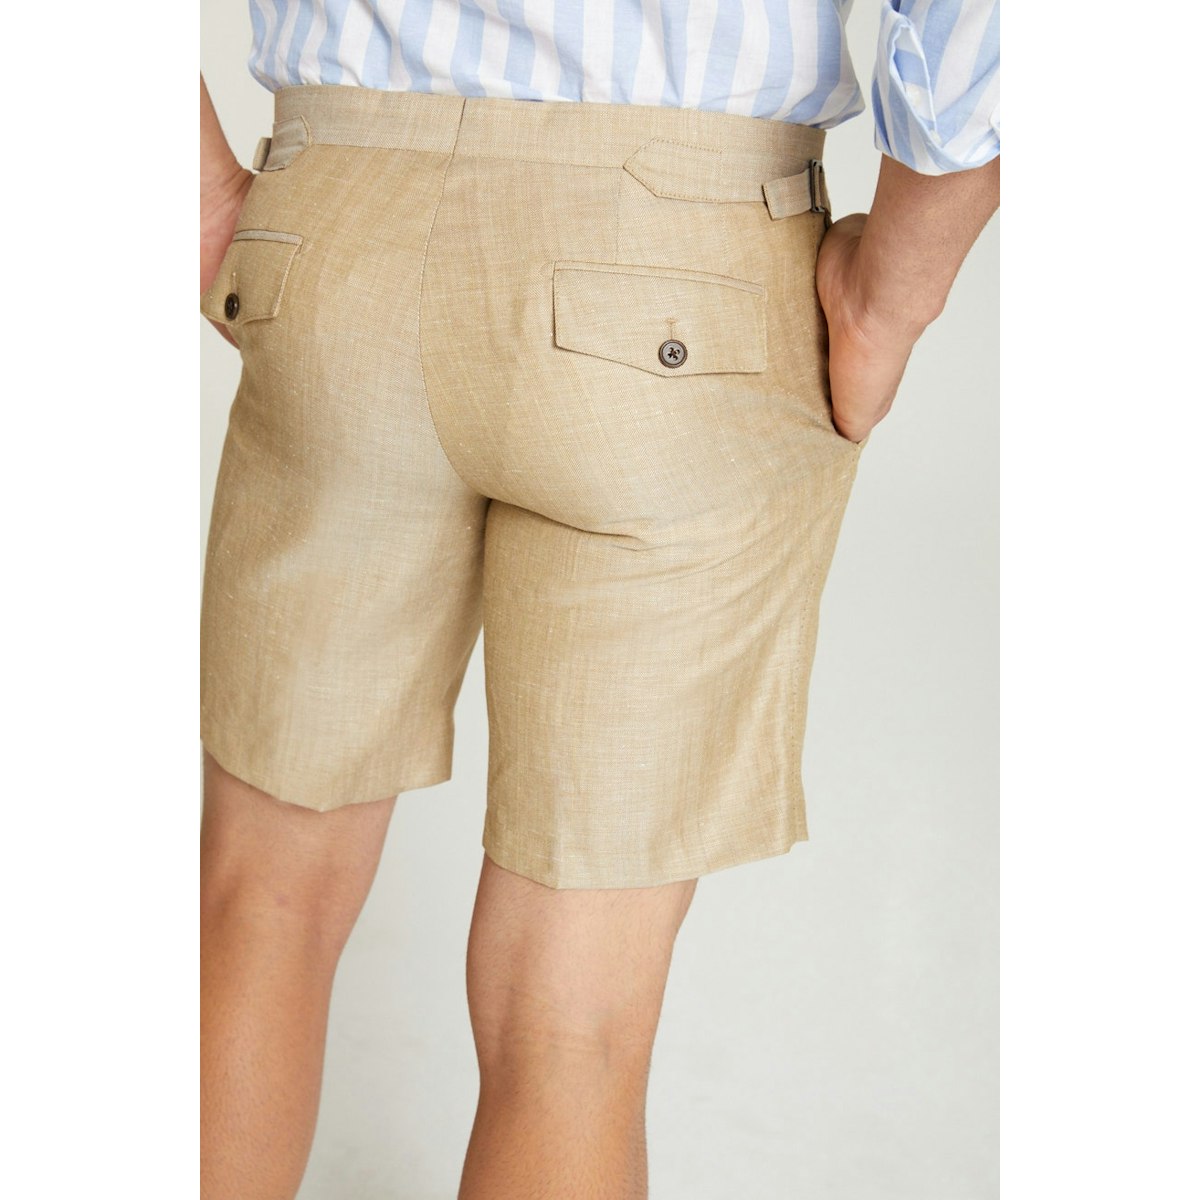 InStitchu Collection The Dragonea Beige Wool/Linen Shorts